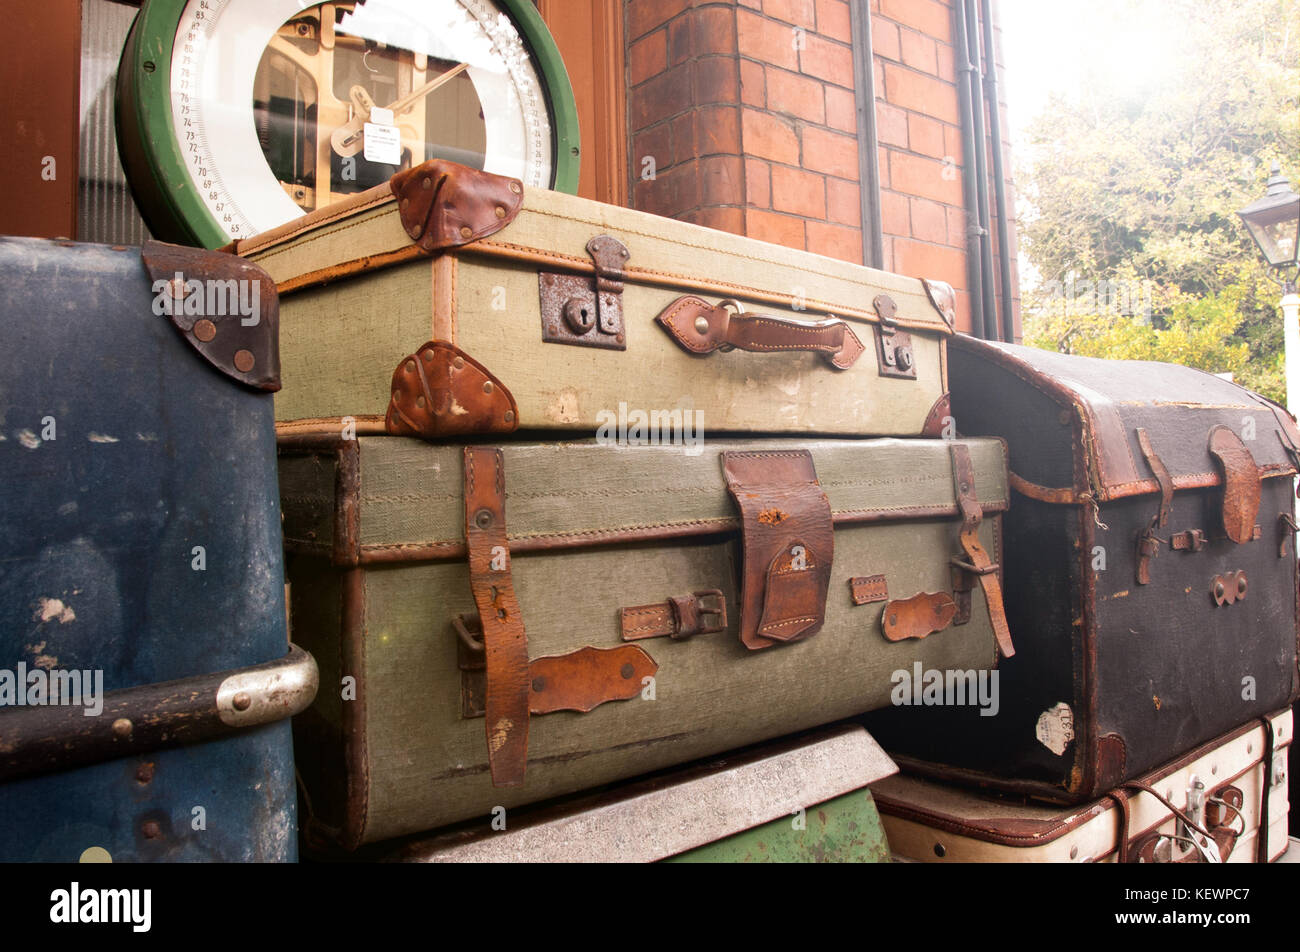 Vintage luggage stacked on a train station platform Stock Photo